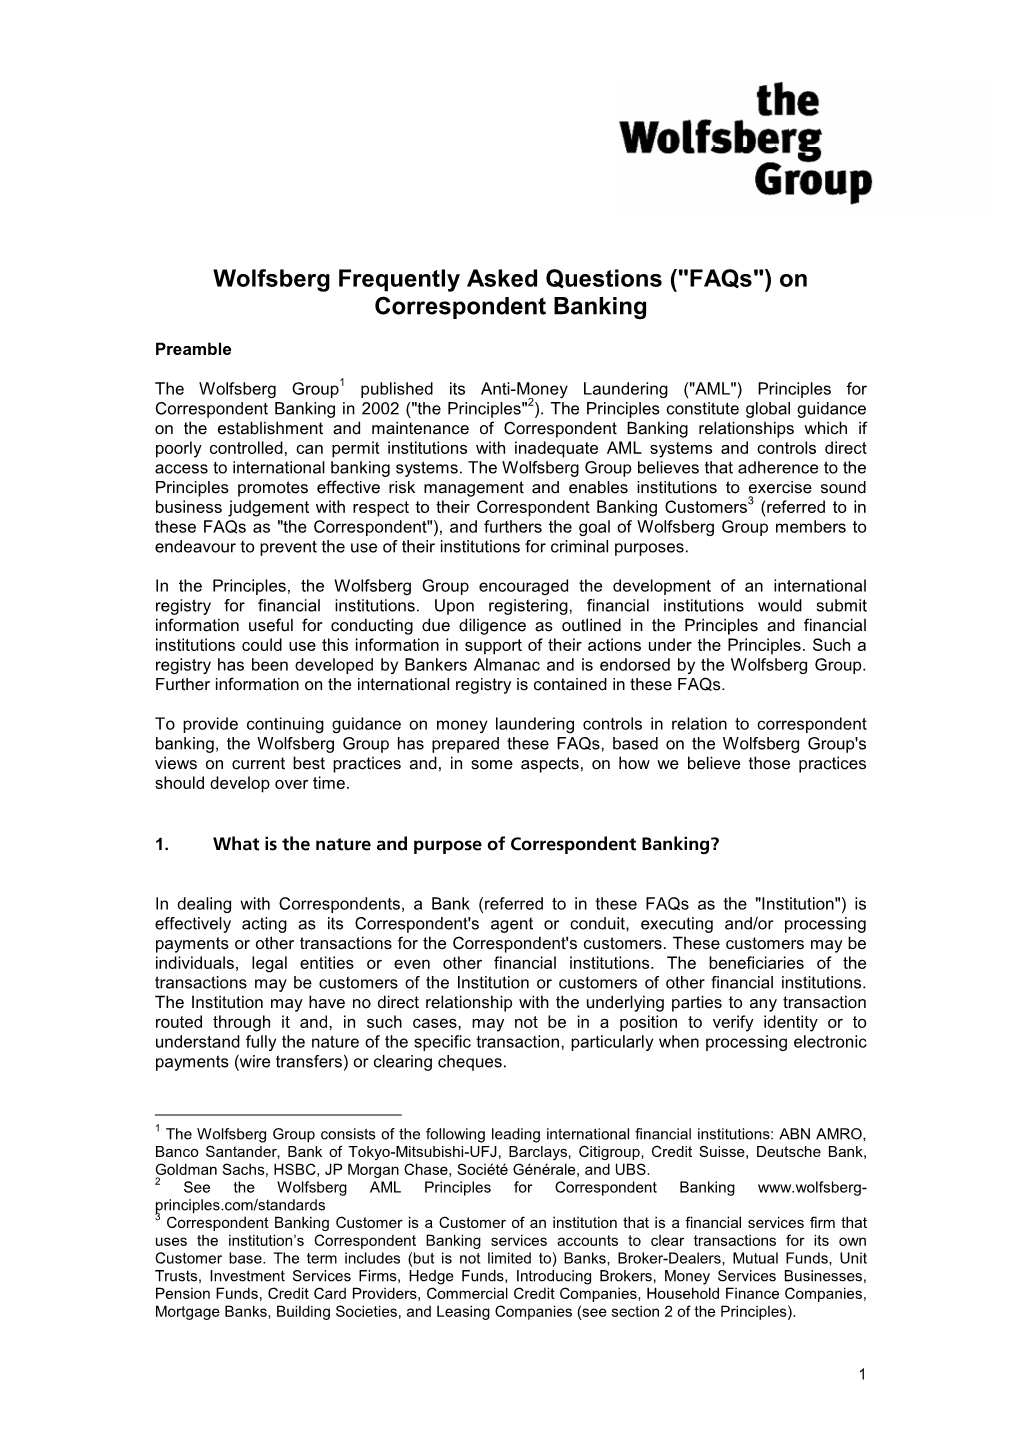 Wolfsberg Frequently Asked Questions ("Faqs") on Correspondent Banking